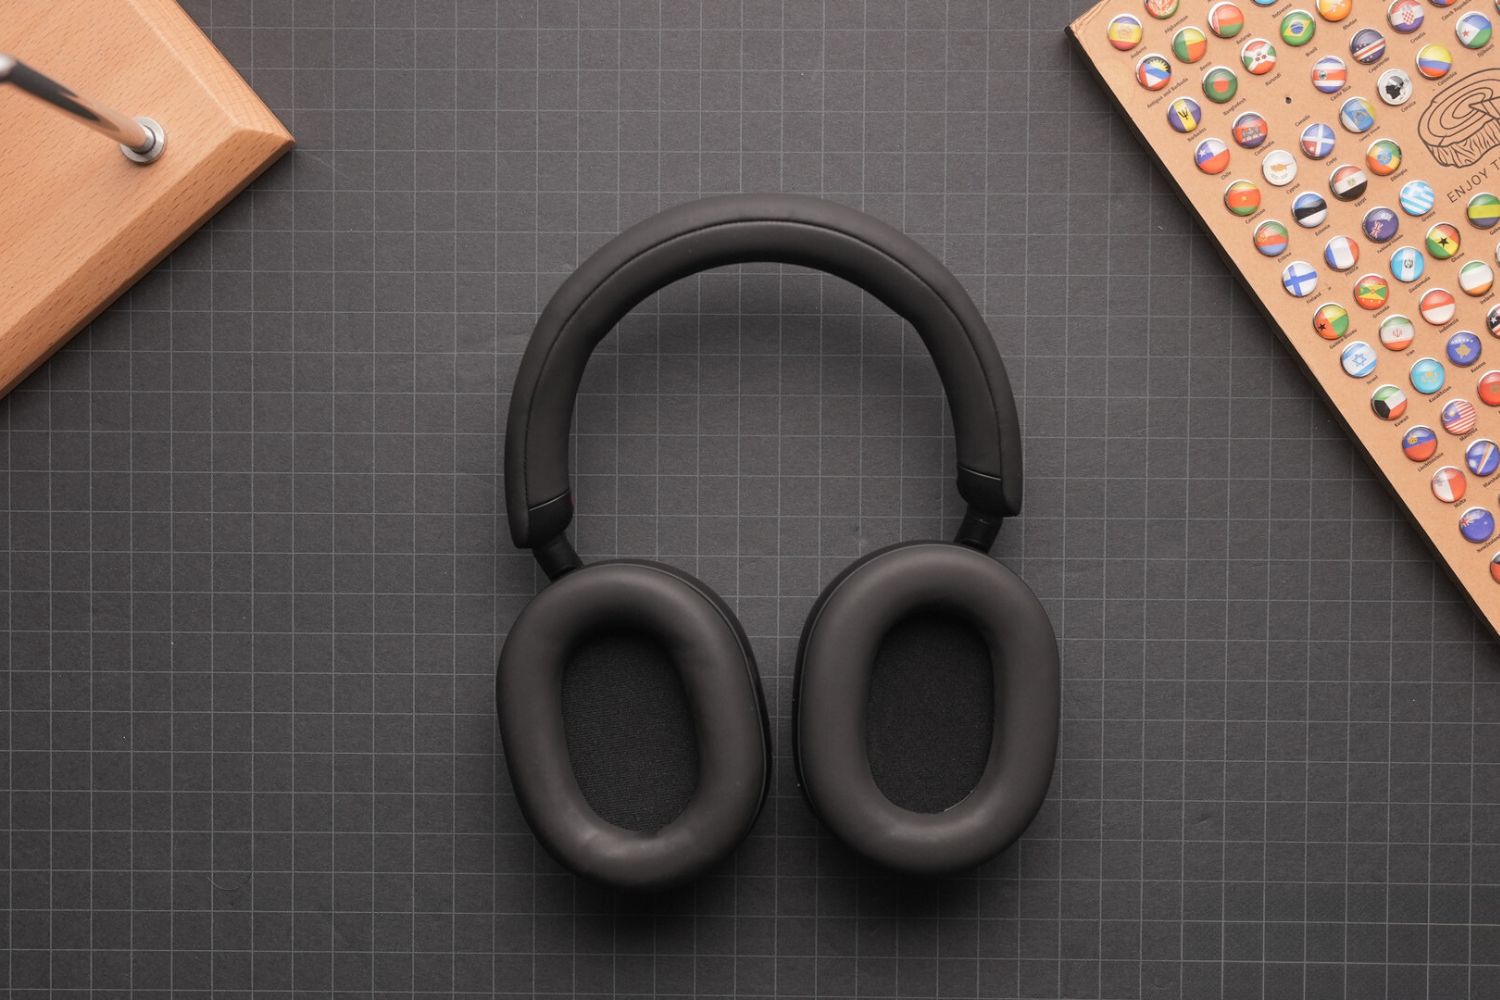 Sony Noise Cancelling Headphones: How To Turn On Noise Cancelling